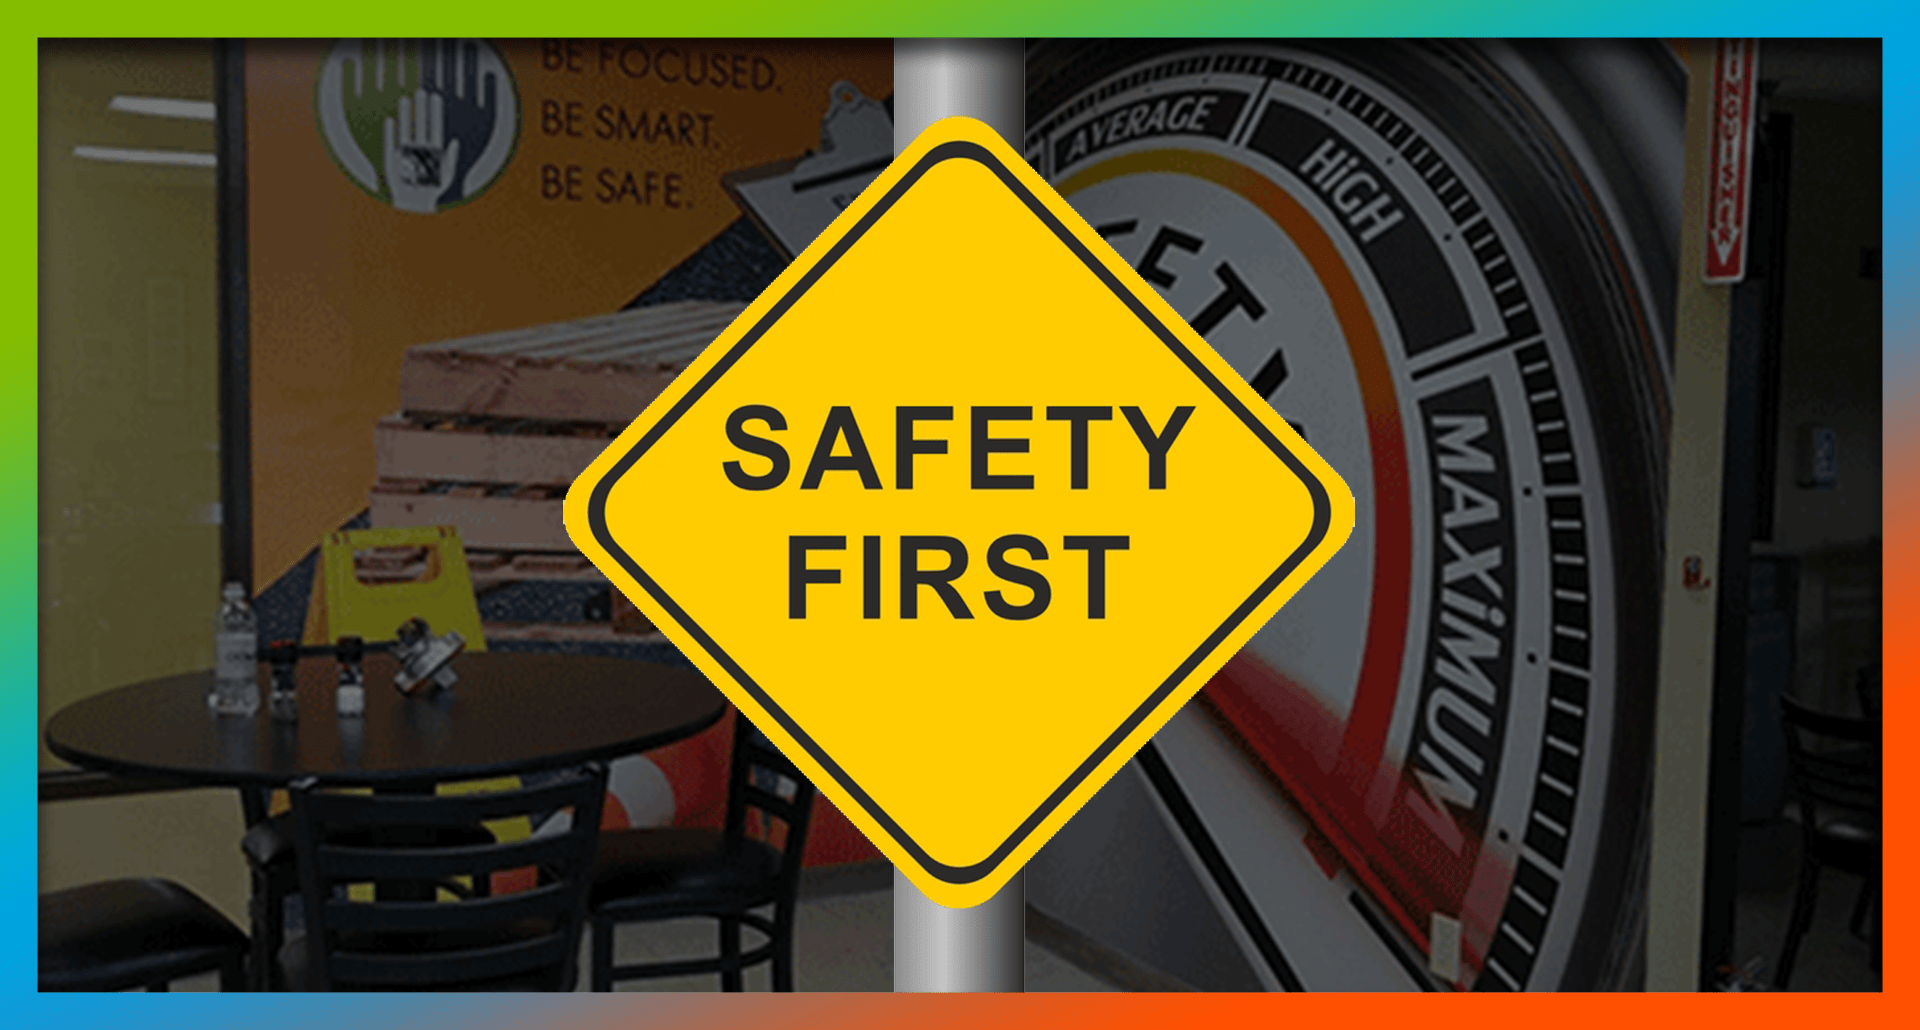 Case Study: PFG Takes “Steps” to Raise Safety Awareness